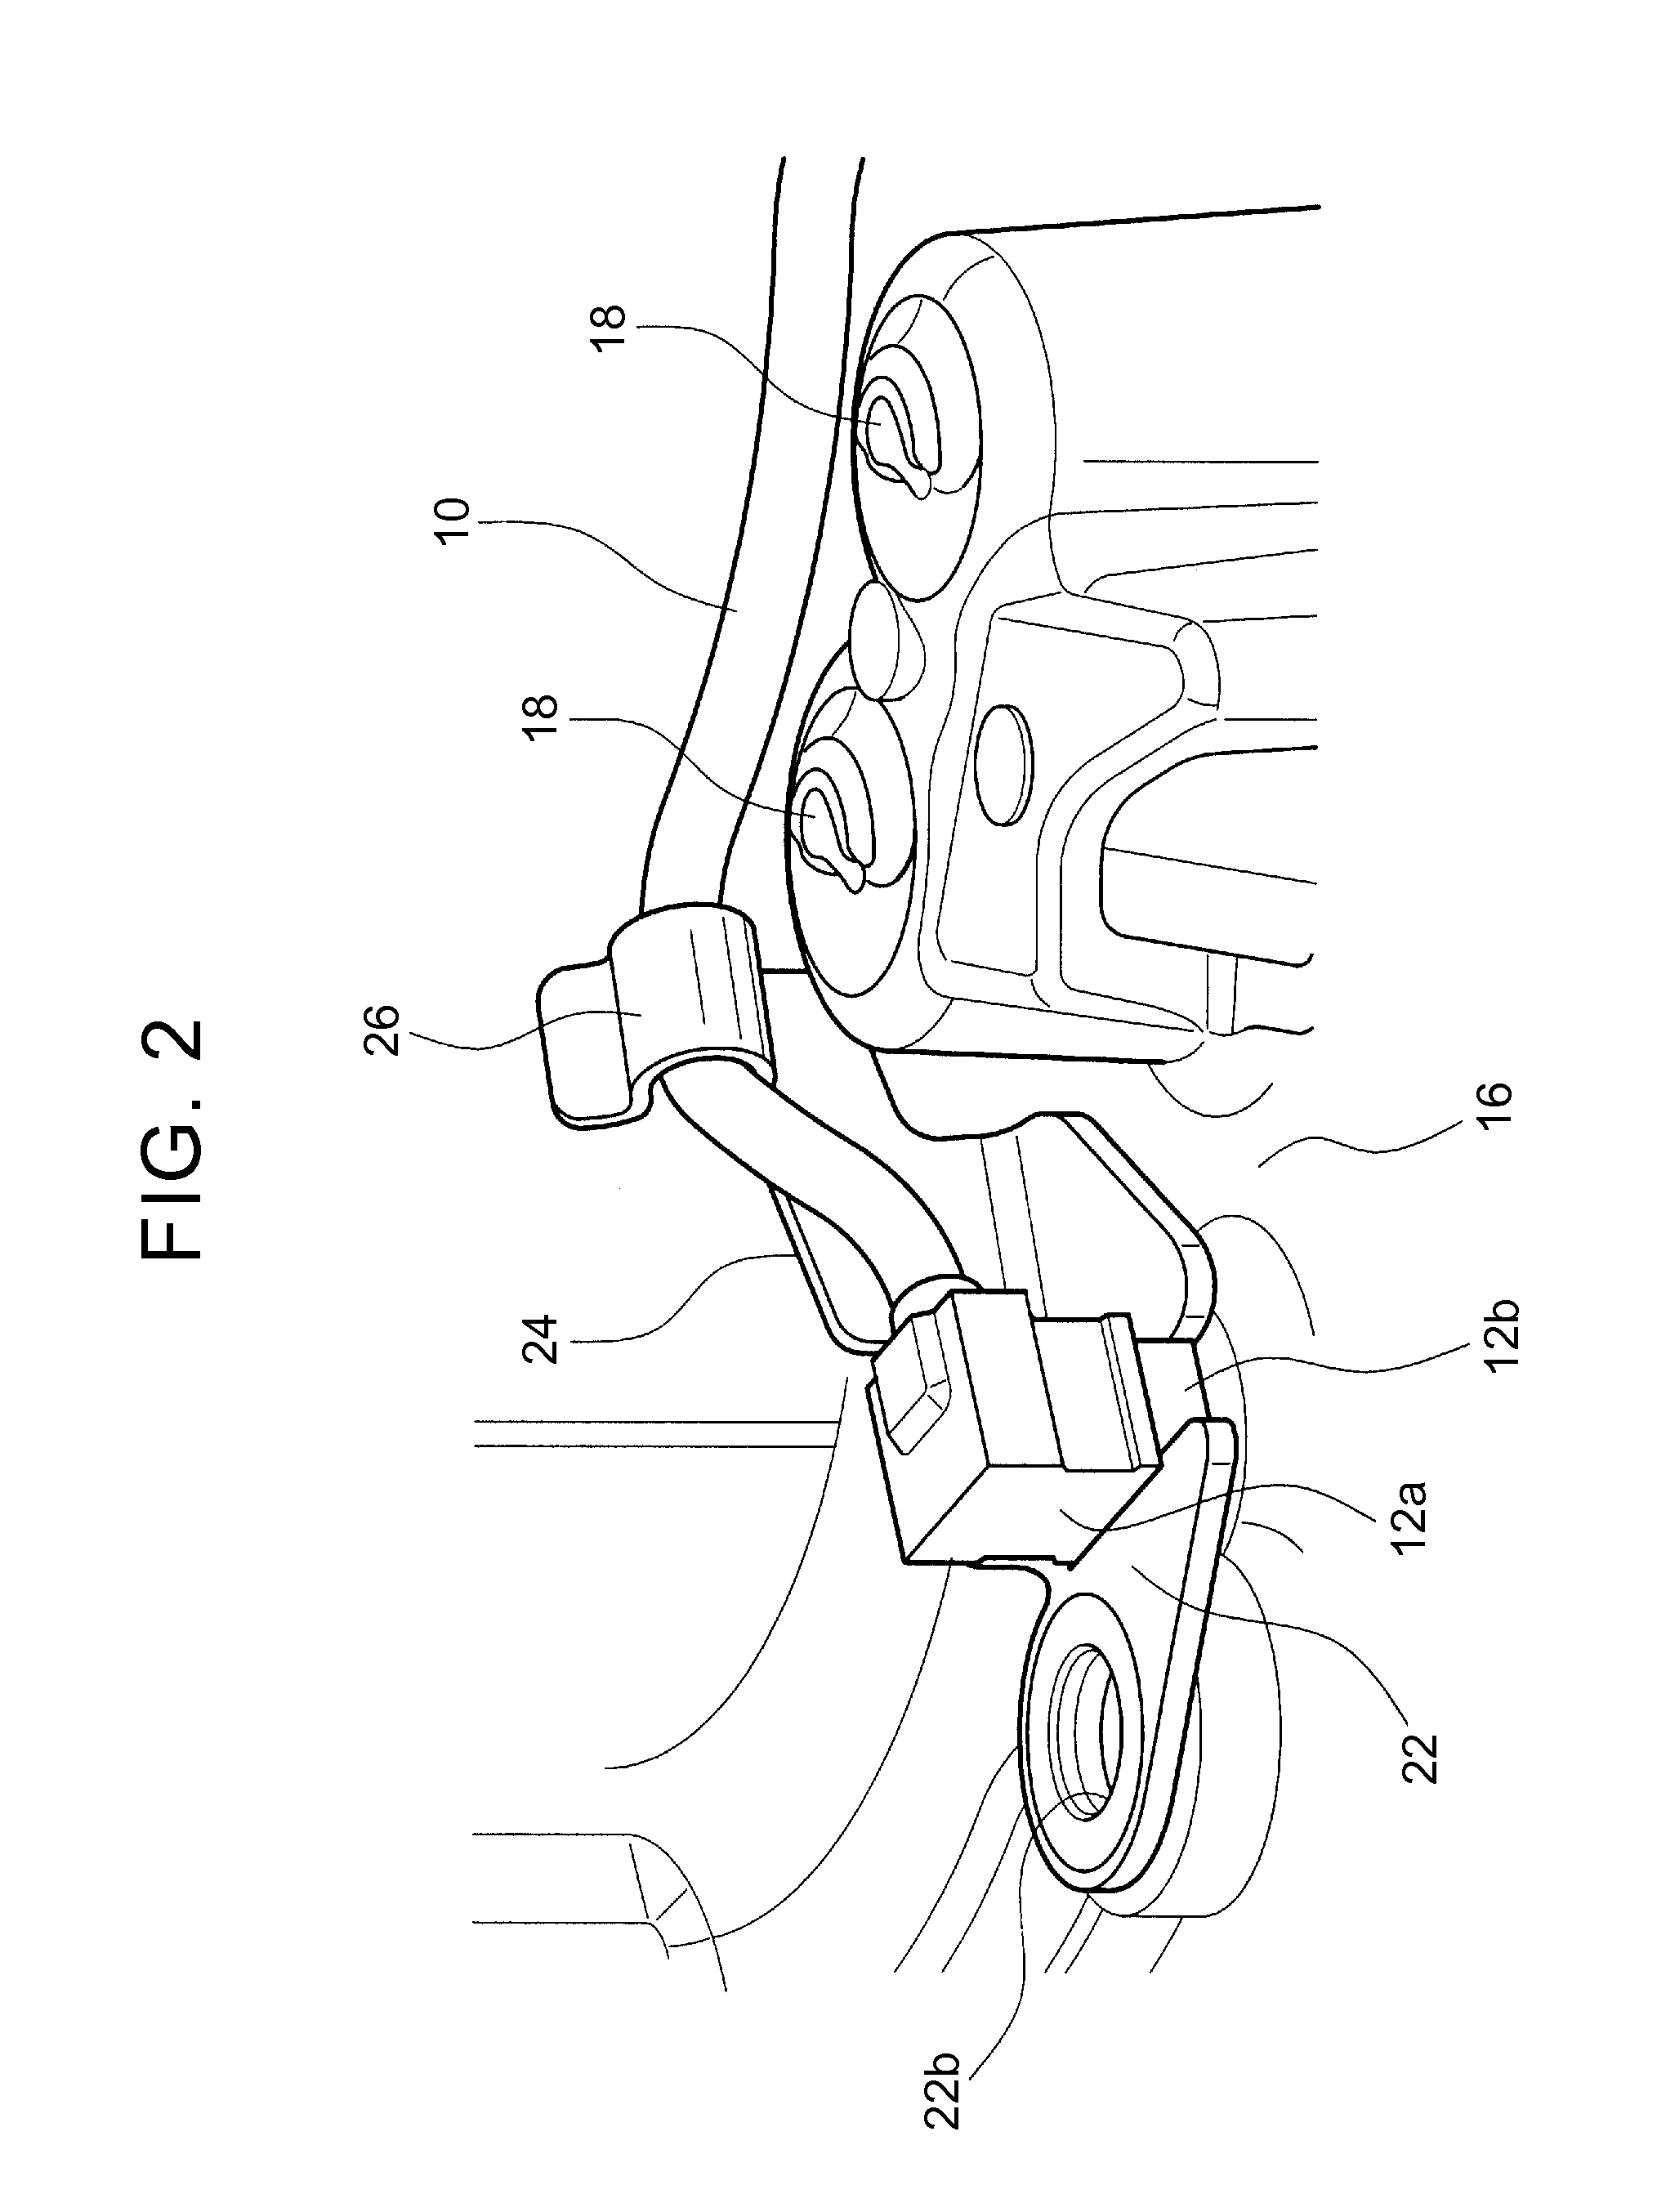 Wire harness fixing structure